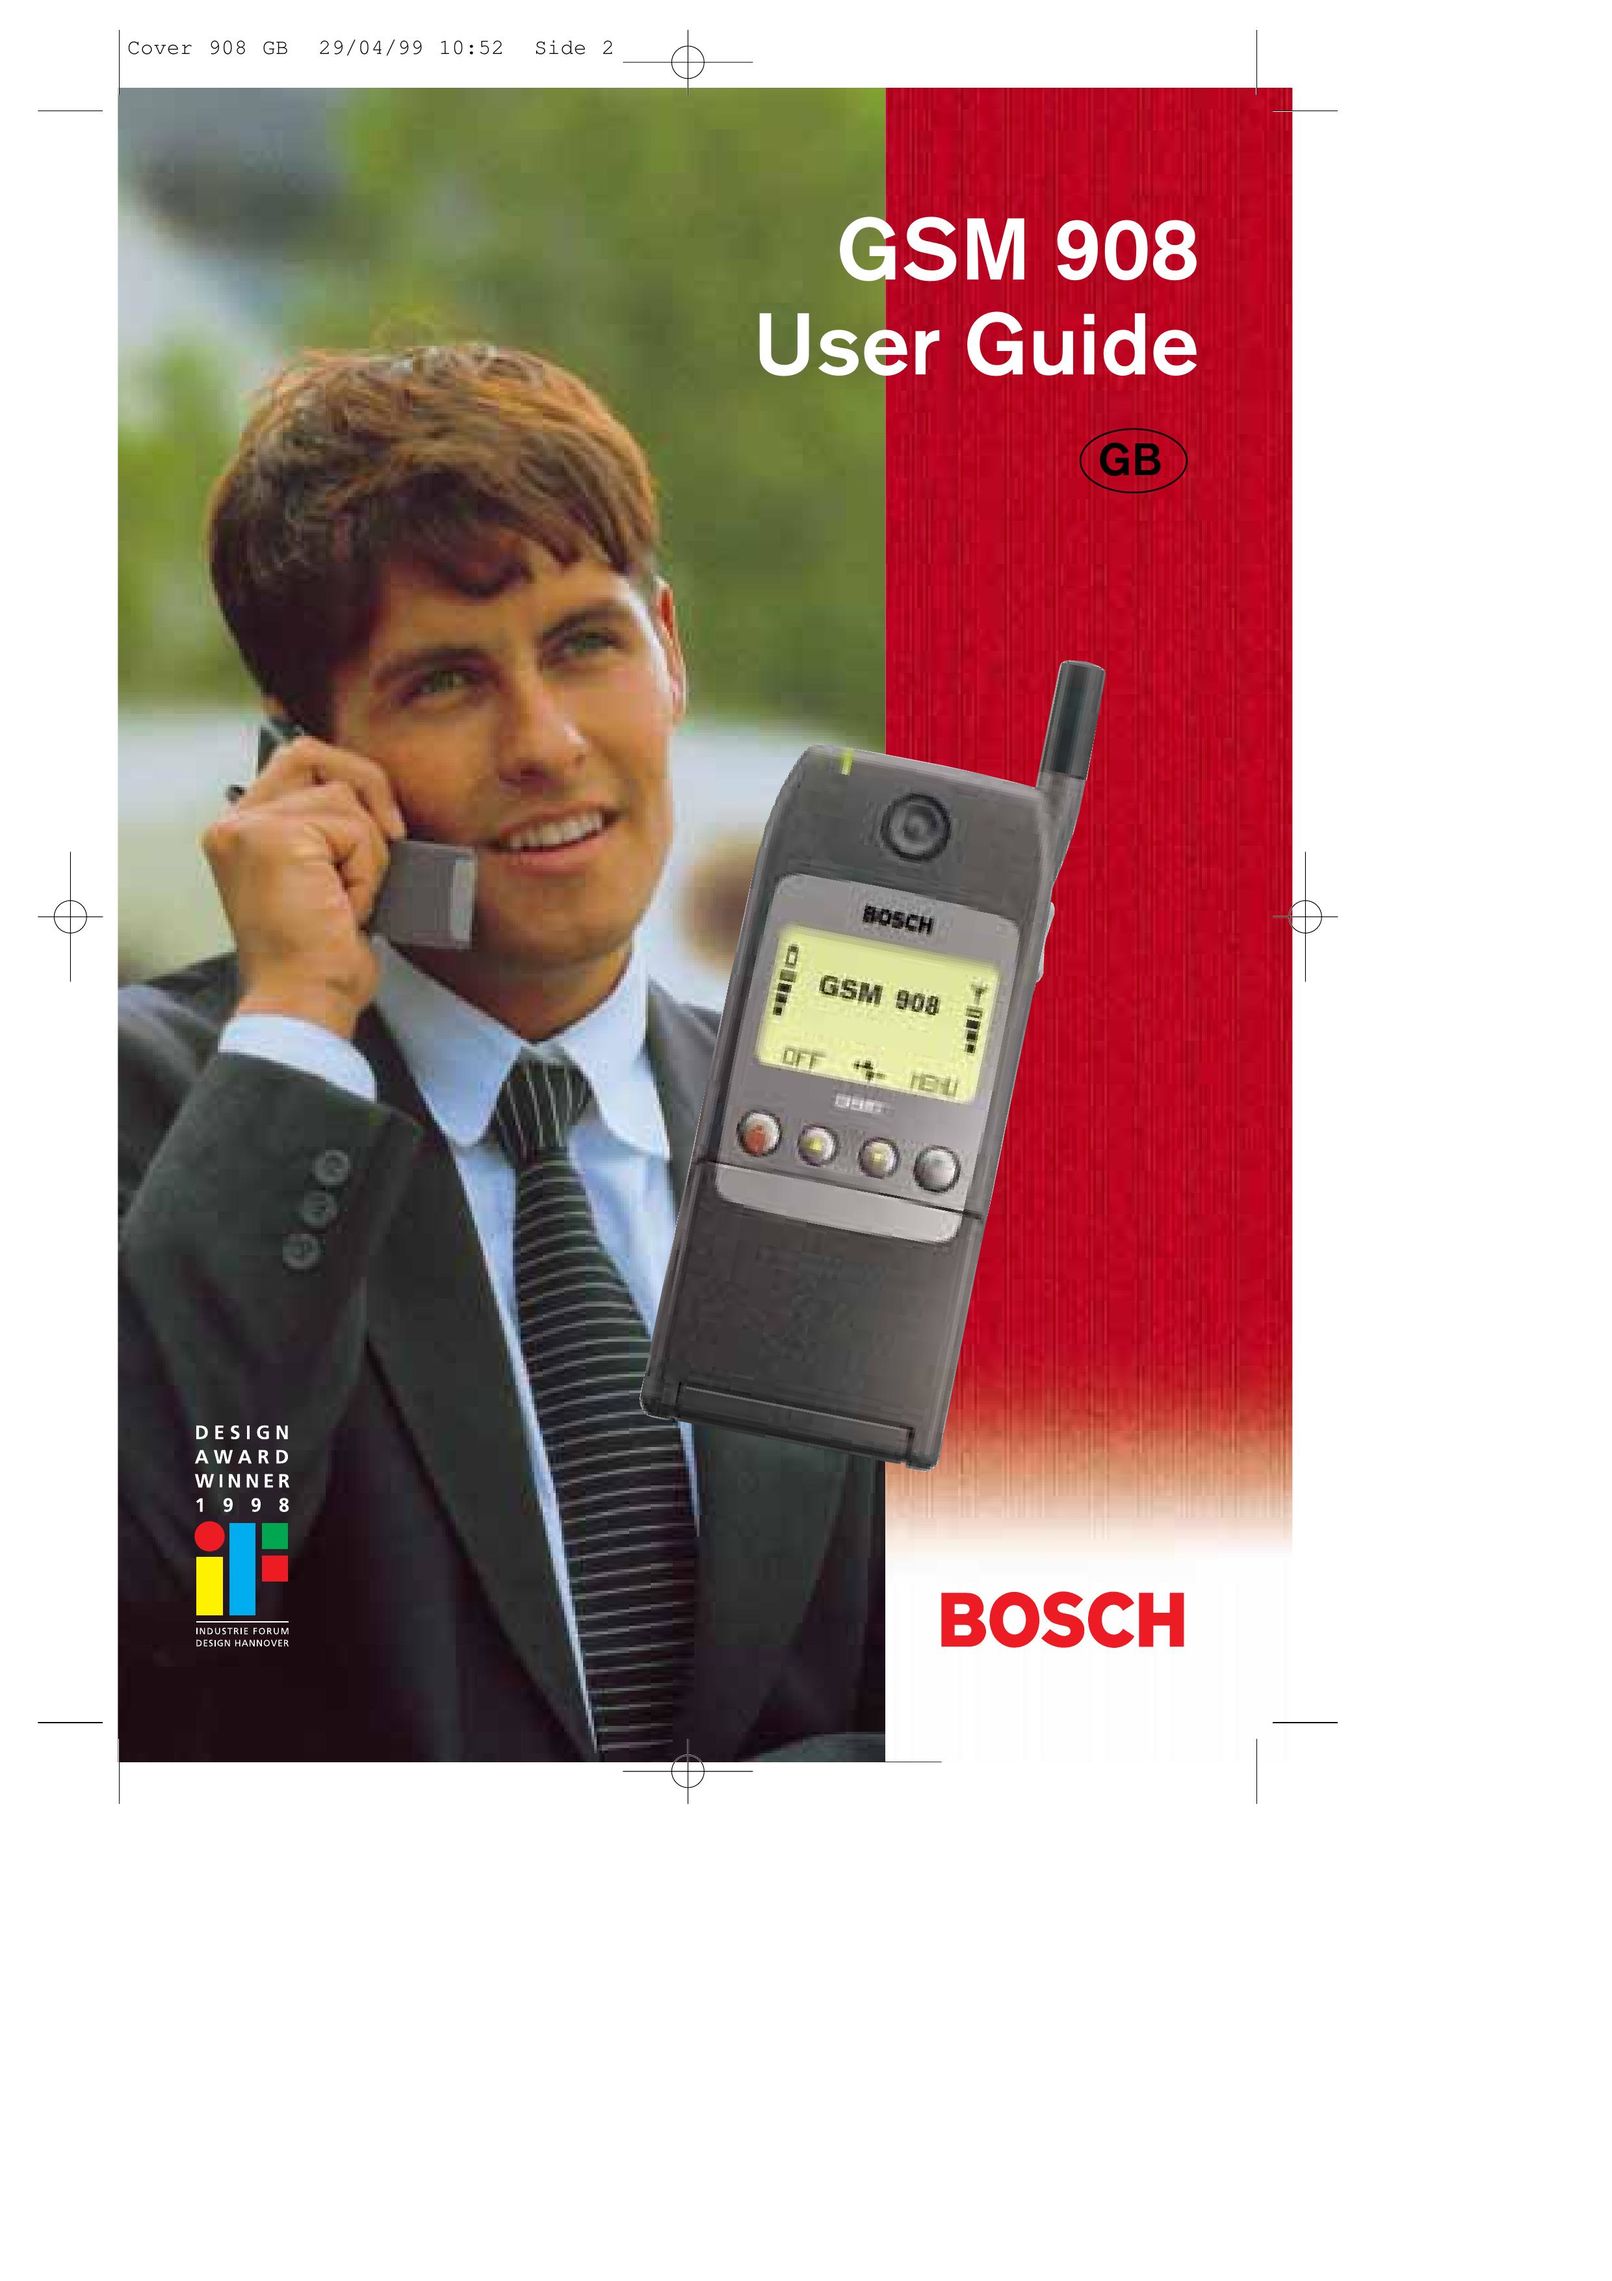 Bosch Appliances GSM 908 Cell Phone User Manual